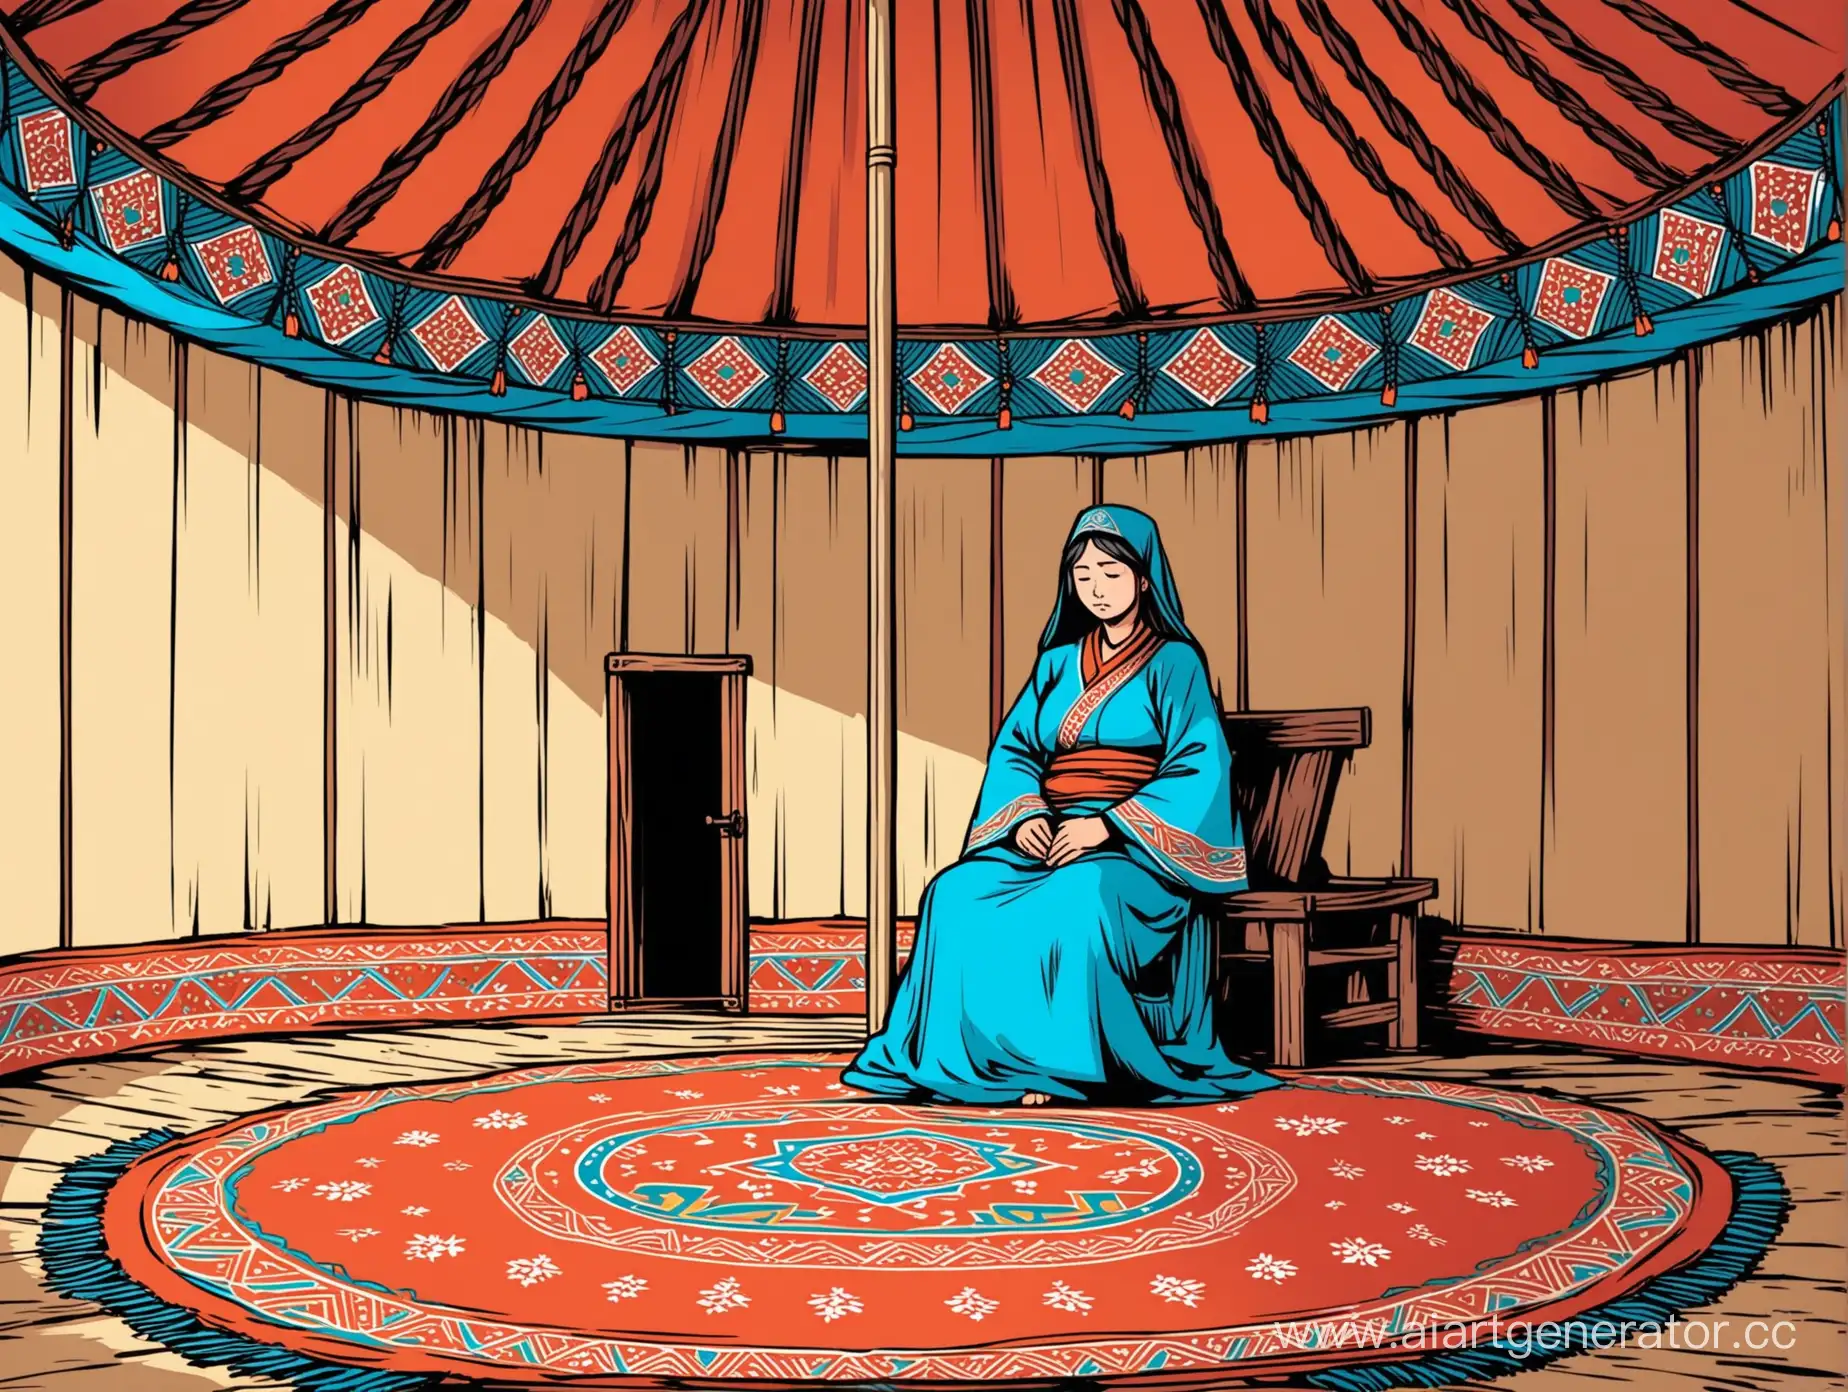 Medieval Kazakh mother is sad because she does not have any children. she is  sitting alone inside a beautiful Kazakh yurt decorated with Kazakh ornaments. the picture in a comic style